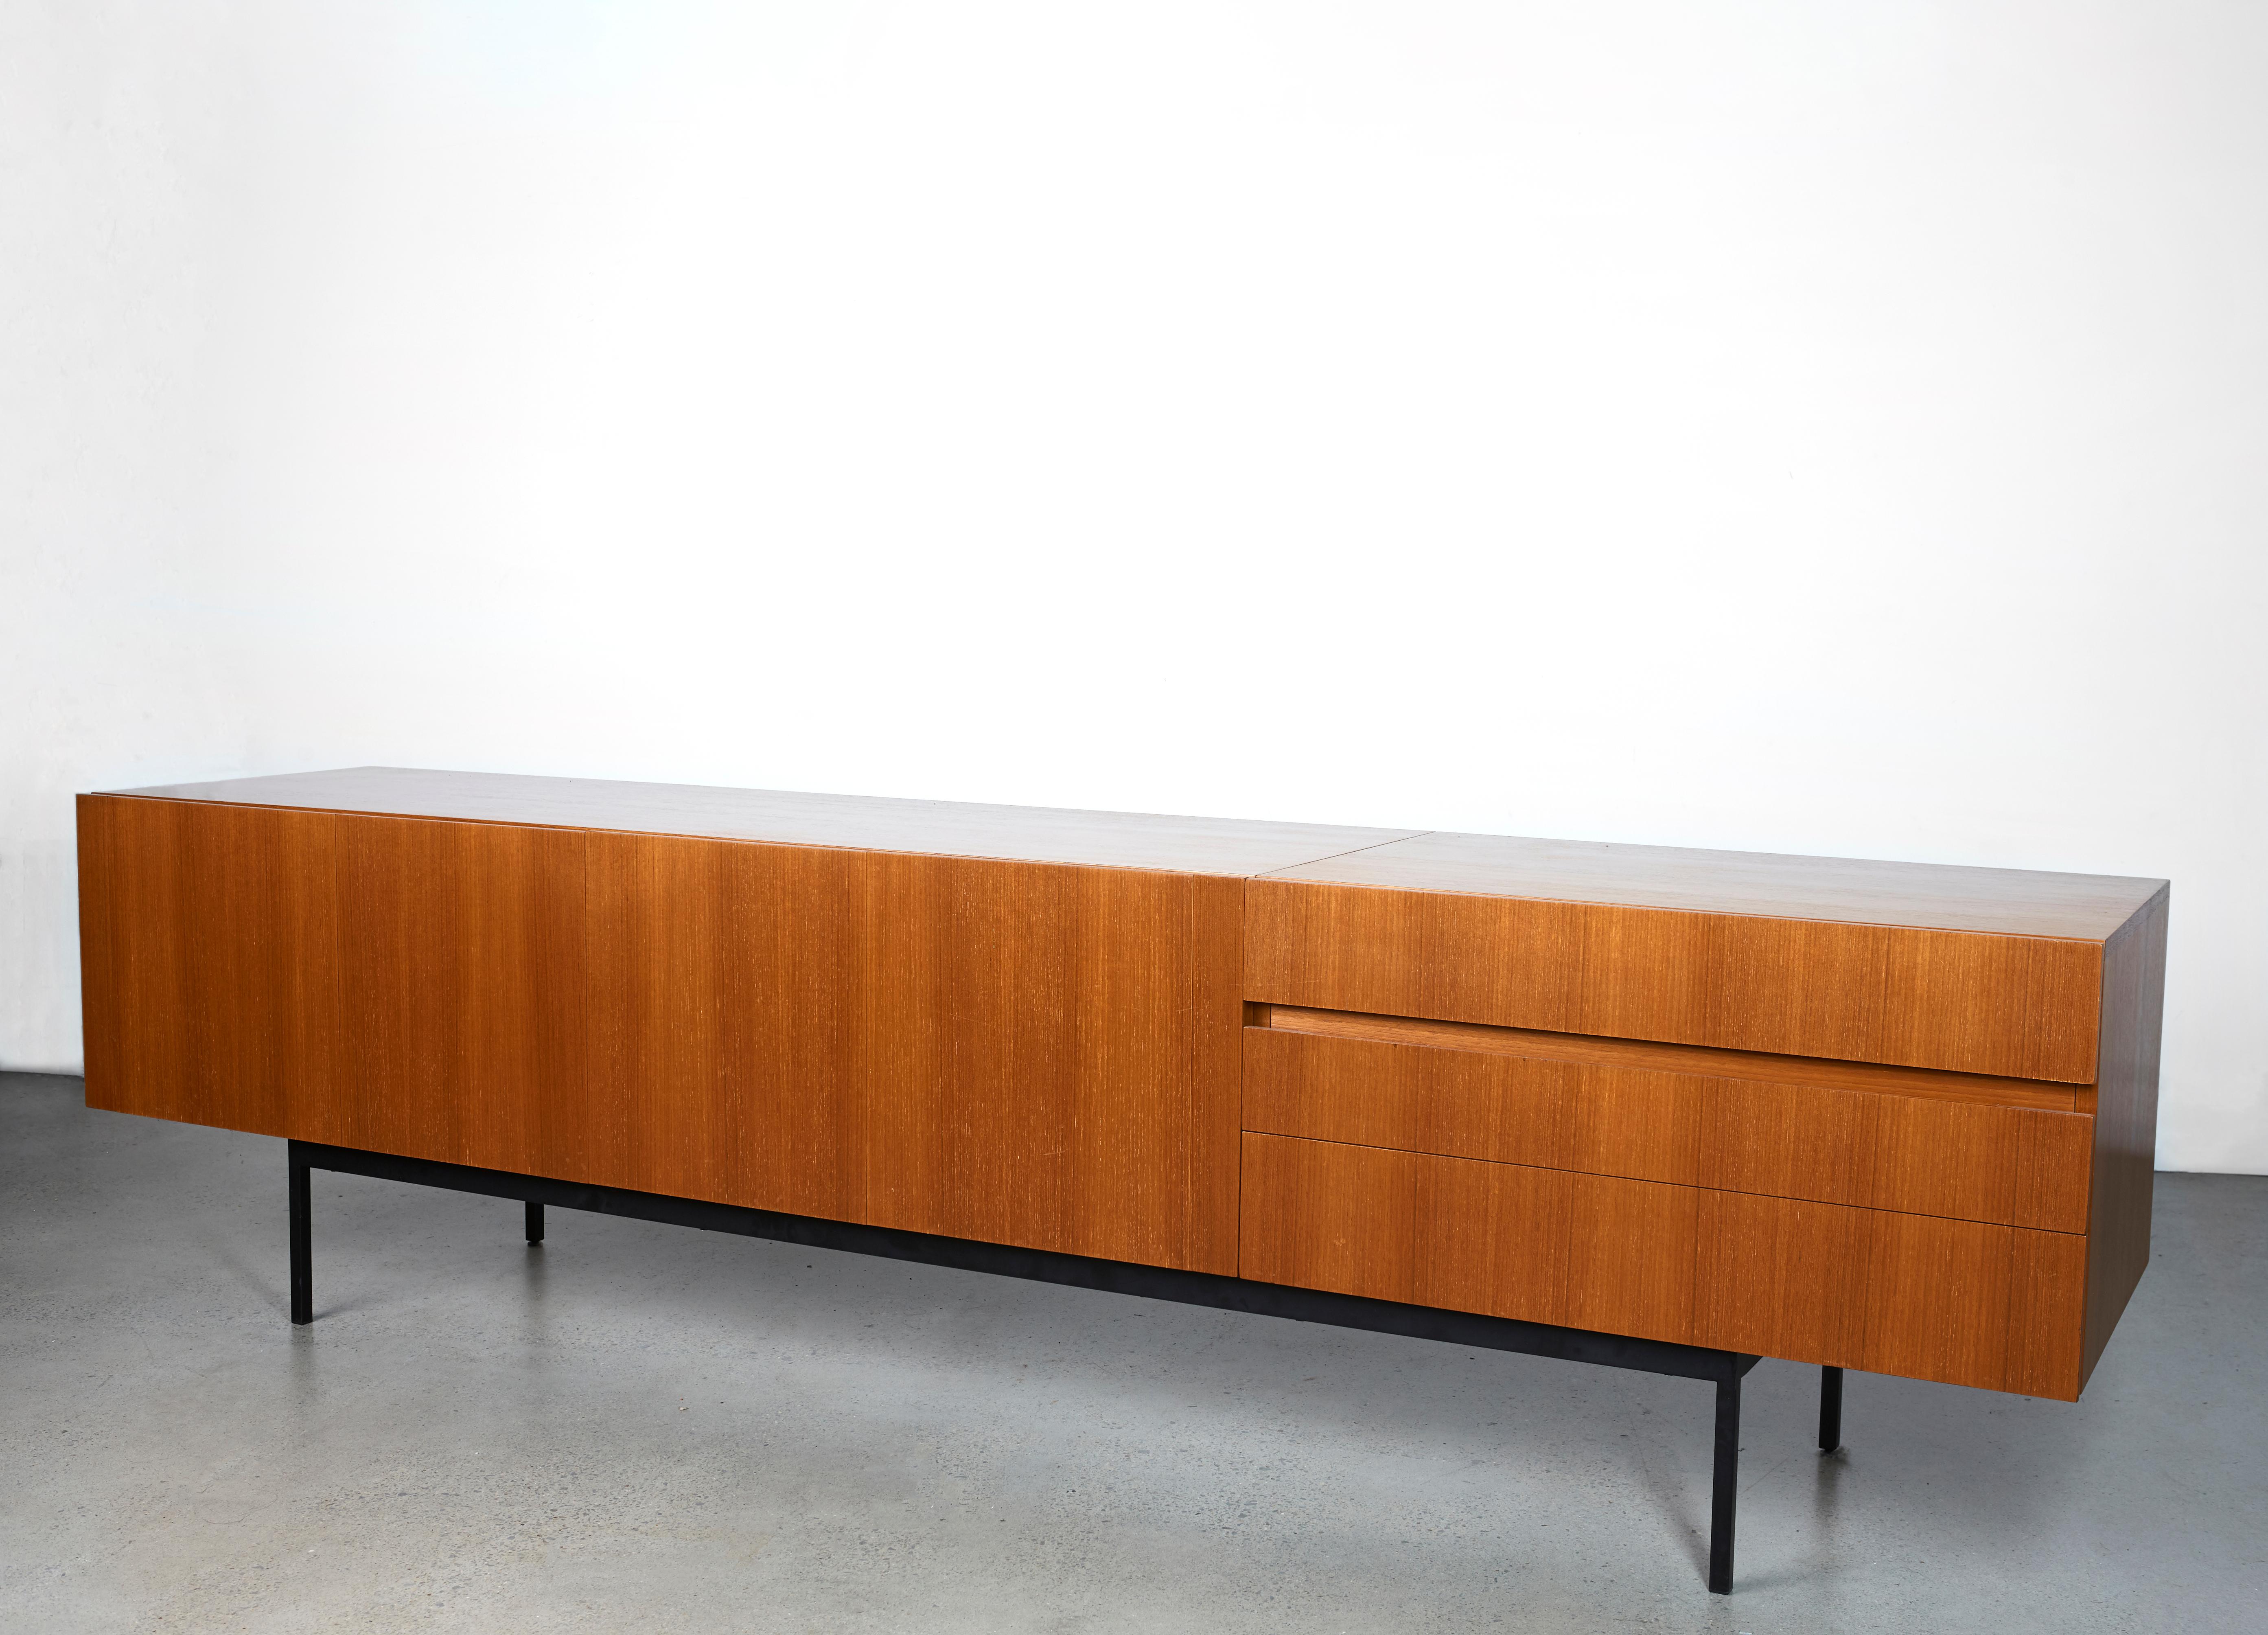 This low teak sideboard, model 'B40', was designed by Dieter Waeckerlin for Behr in a minimalist mid-century style. This piece of furniture with teak on the outside and maple wood/beech on the inside sits on a solid black metal base. It features a